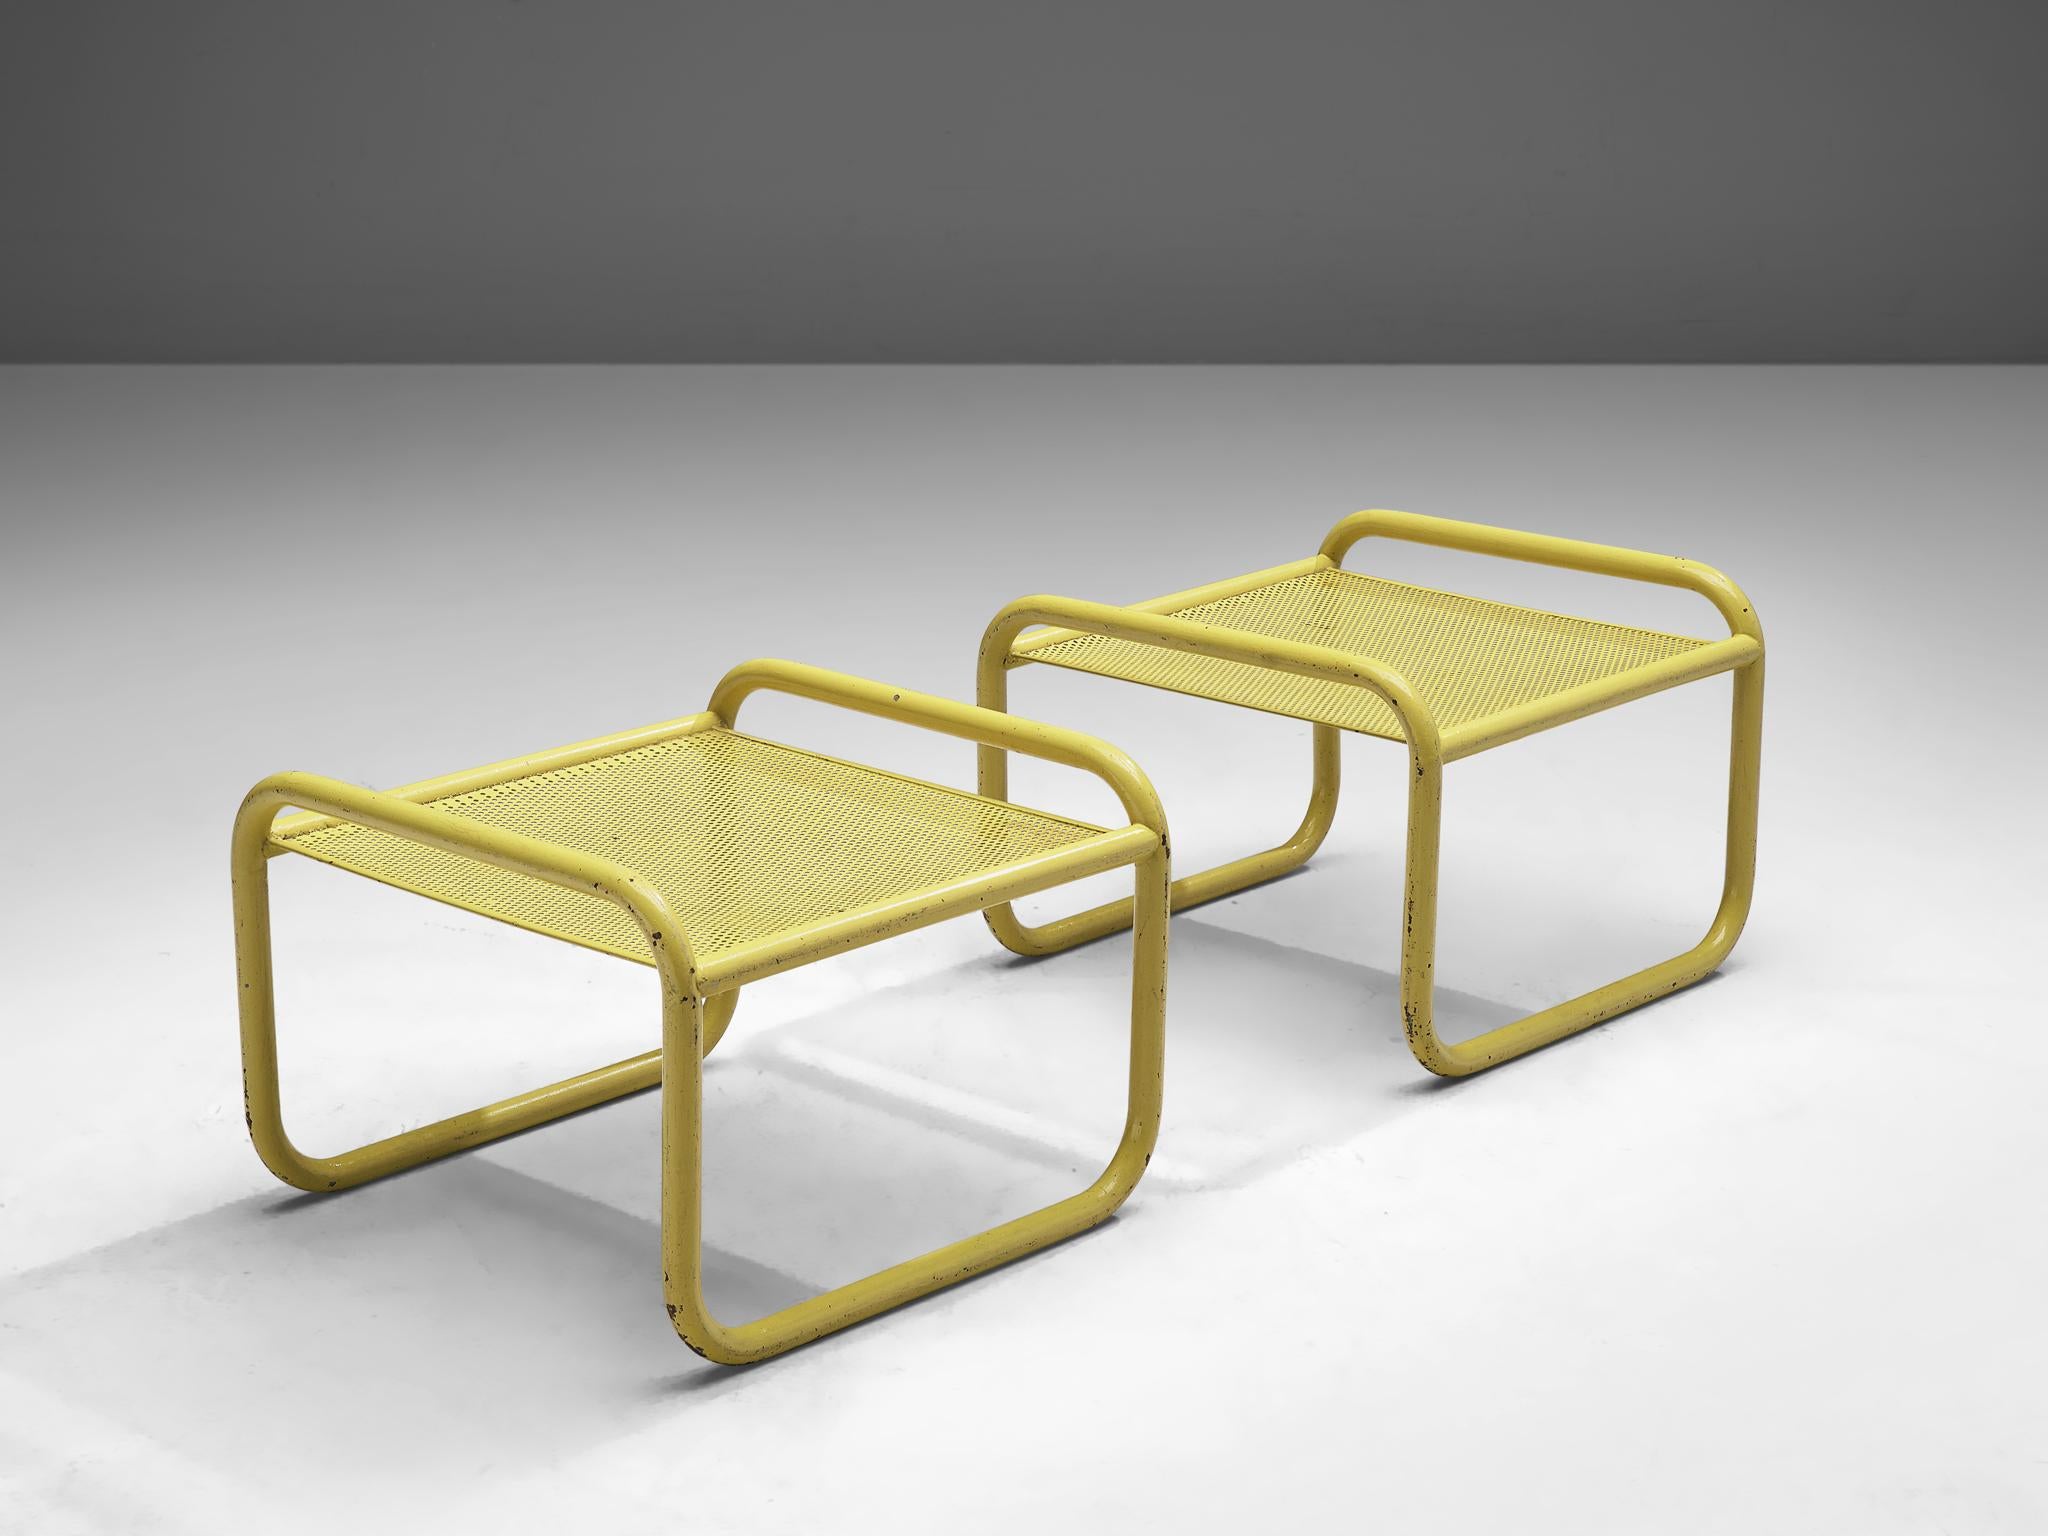 Gae Aulenti for Poltronova, 'Locus Solus' pair of stools, lacquered tubular steel, fabric and glass, Italy, 1964

Do you also love the movie La Piscine? You can bring its famous poolside furniture to your own garden. These seats are designed by